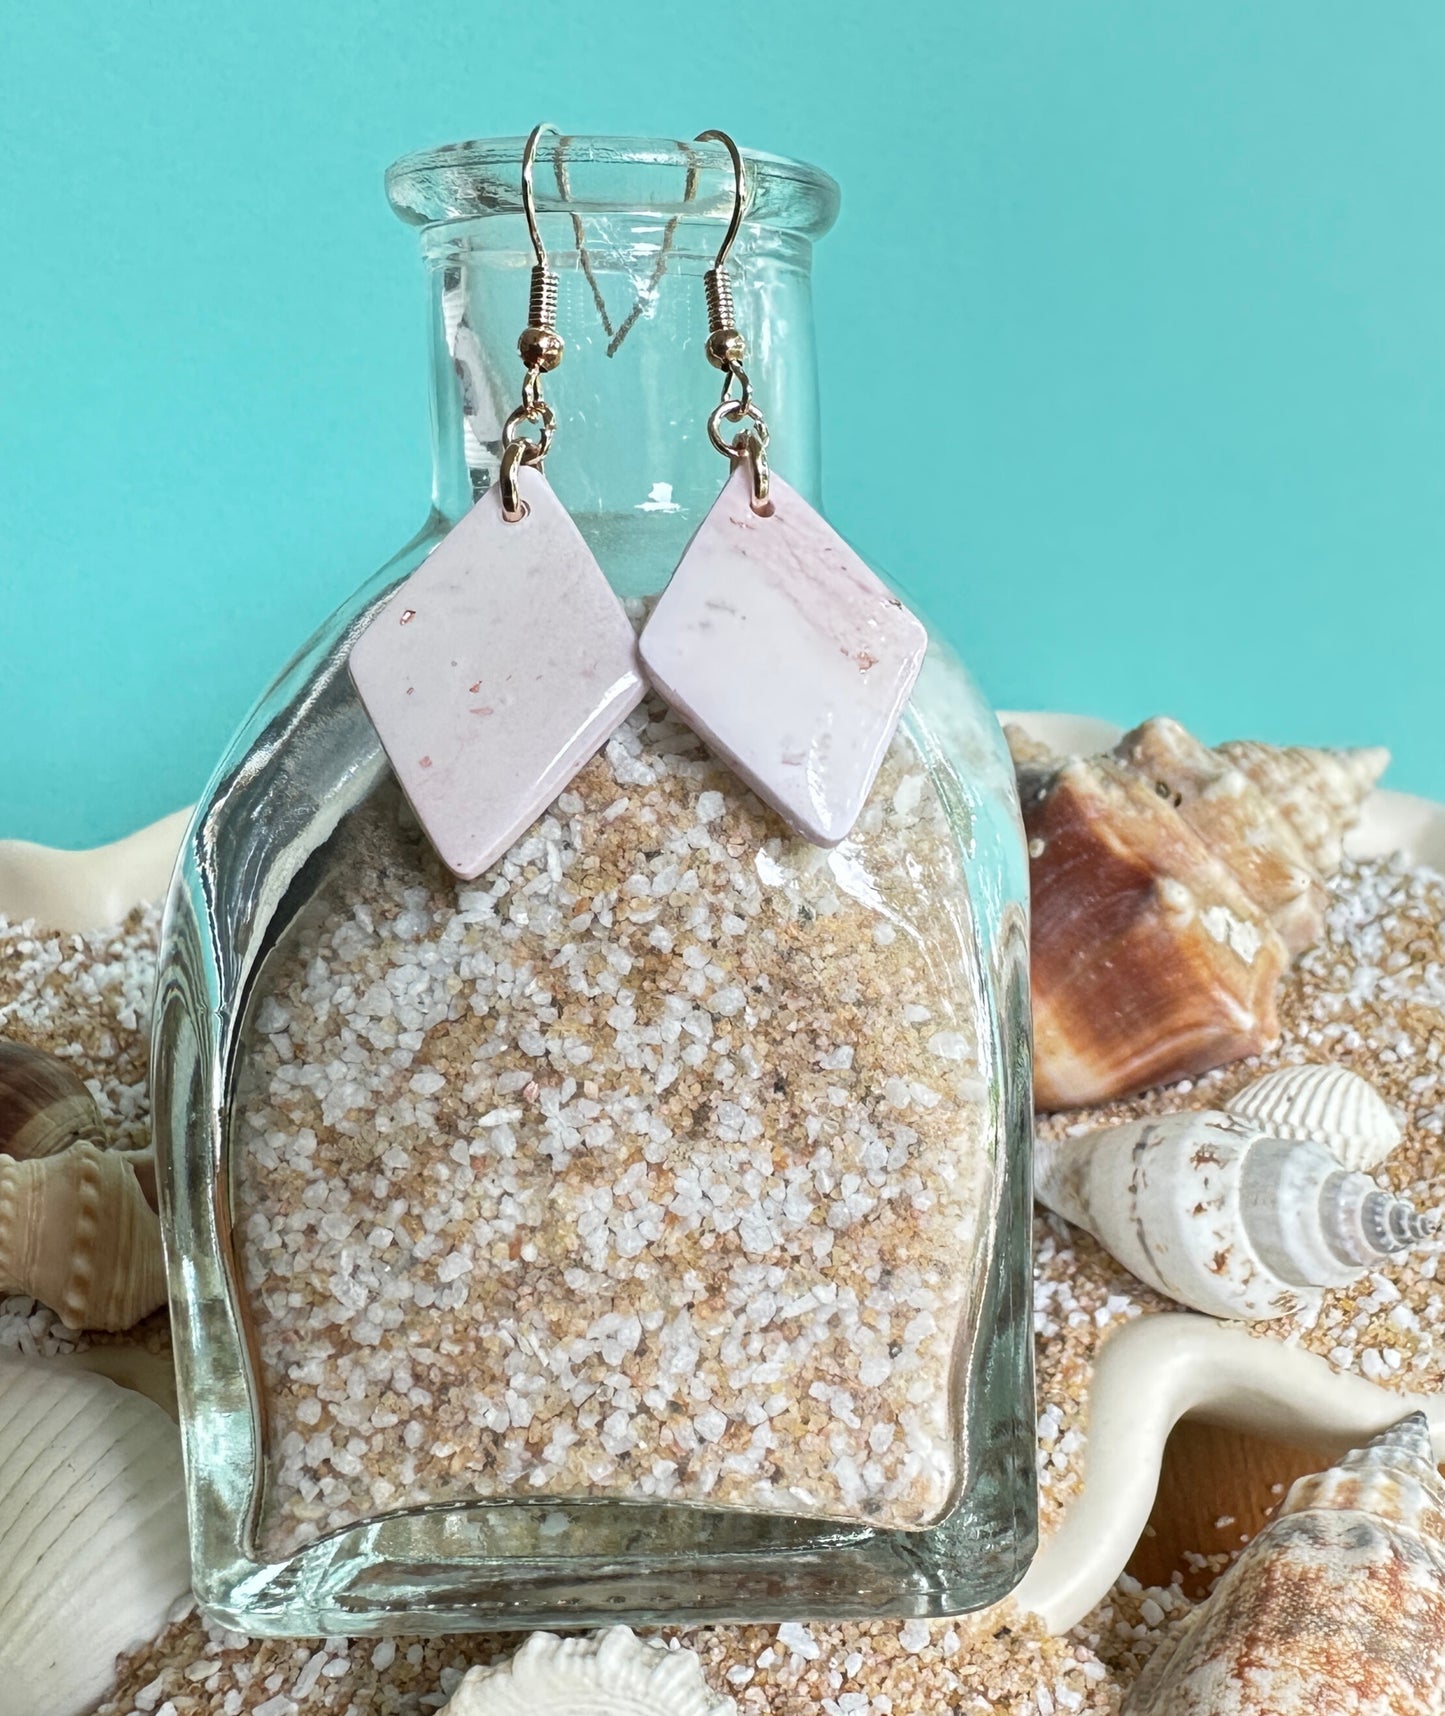 Champagne Shimmer Diamond-Shaped polymer clay dangle earrings hanging on a bottle of sand surrounded by sand and seashells. Colors are light pinks and small gold flecks. Rose gold colored hooks and rings made of  nickel-free iron.